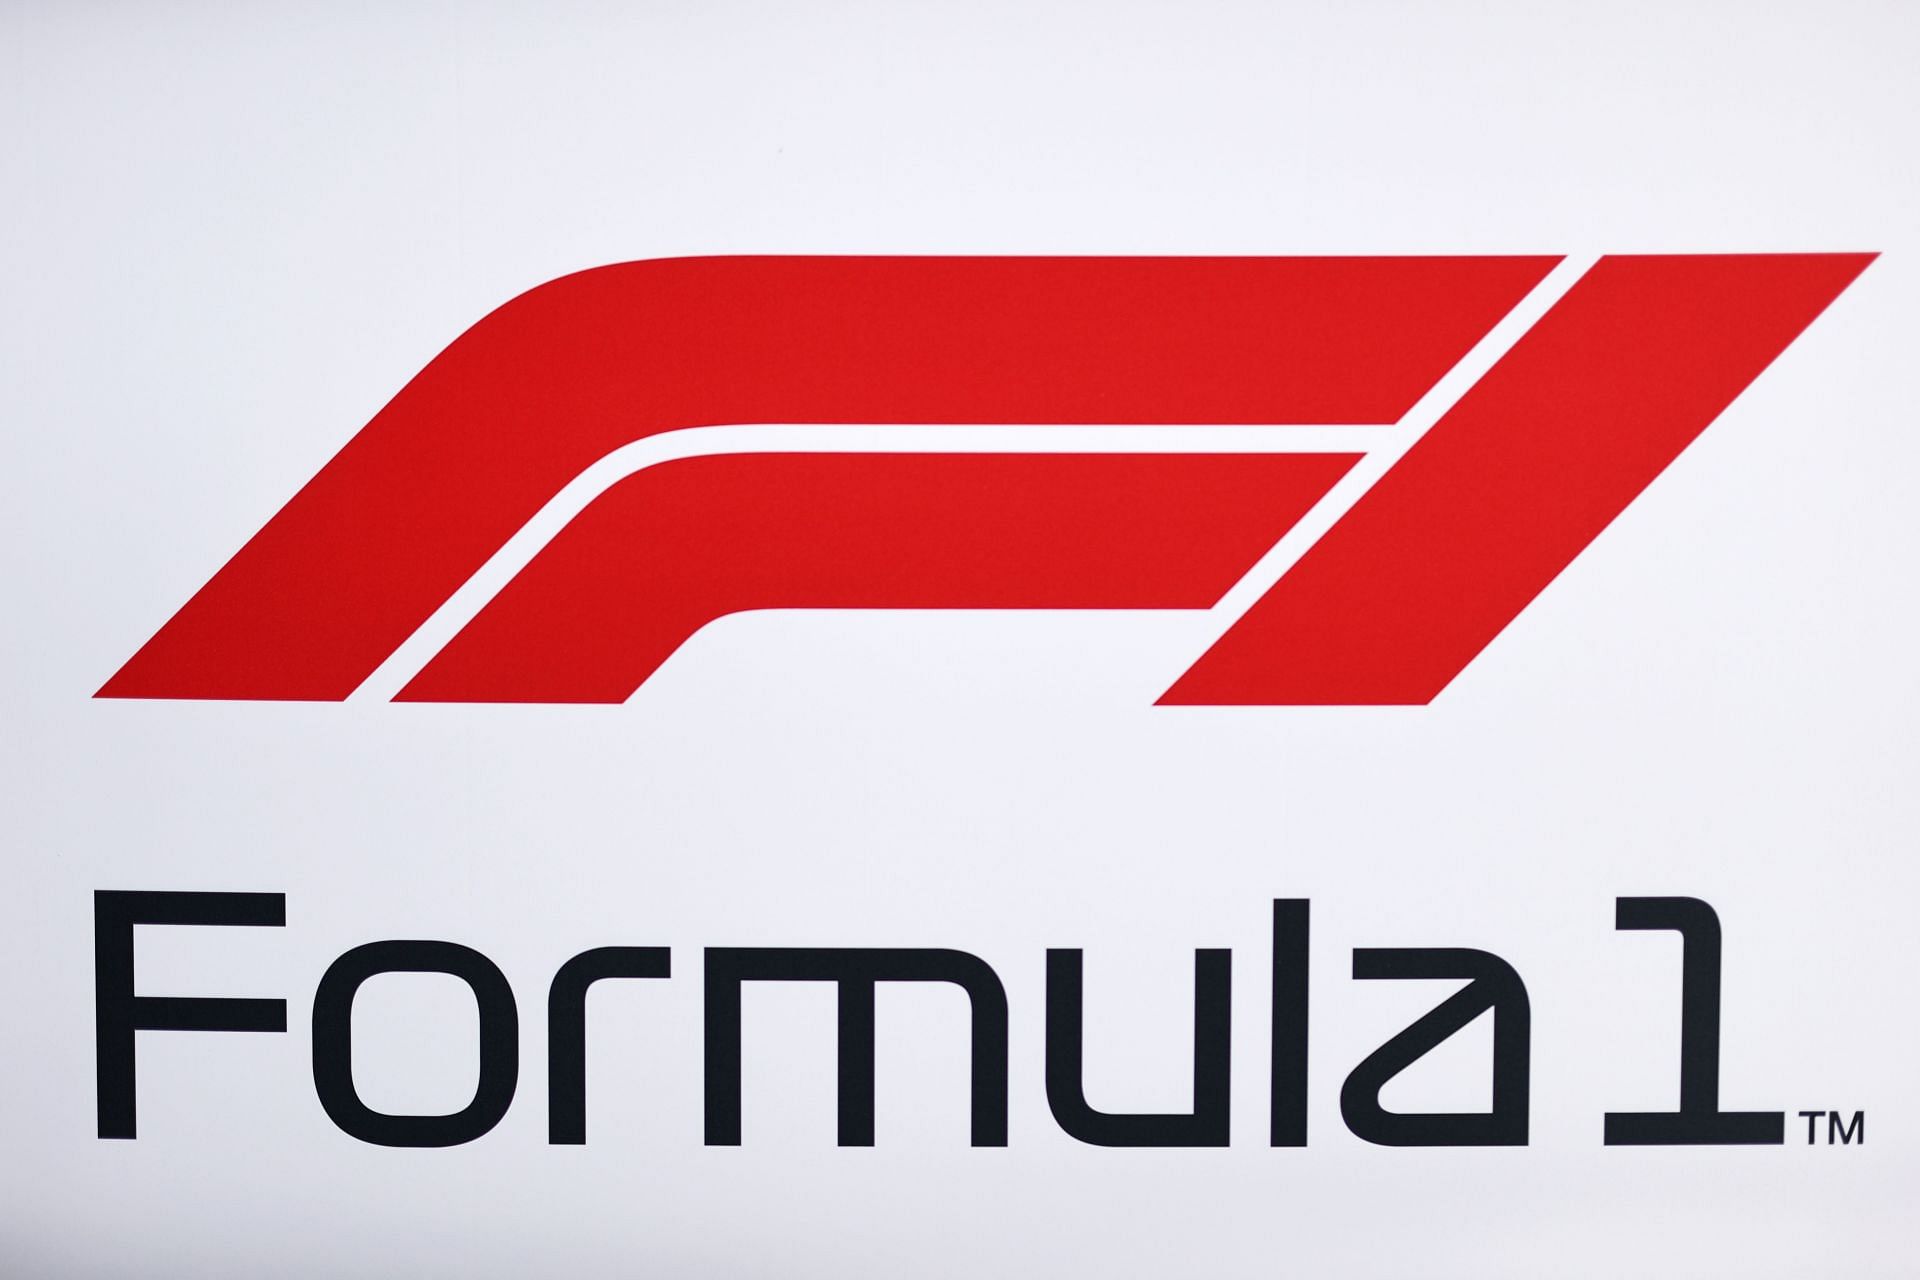 The Formula 1 logo in the Paddock during the F1 Grand Prix of USA (Photo by Chris Graythen/Getty Images)